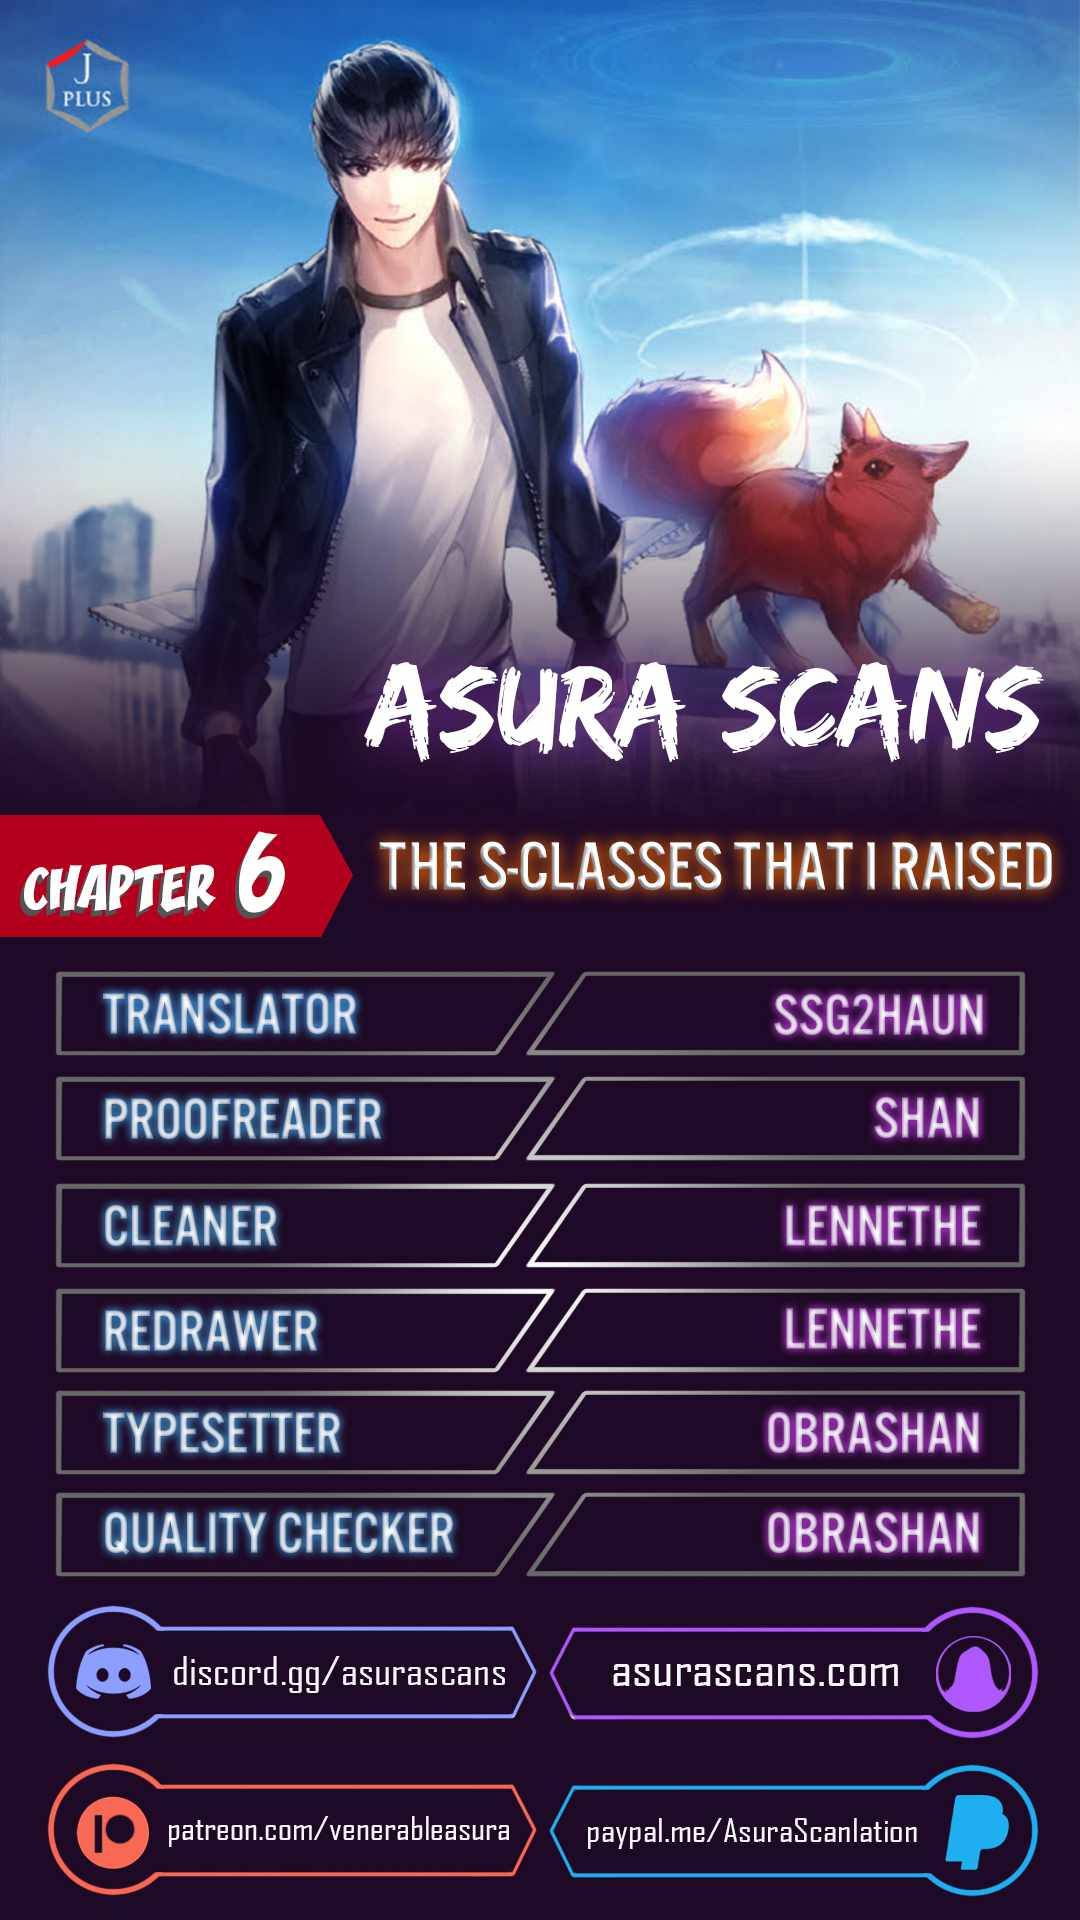 The S-Classes That I Raised chapter 6